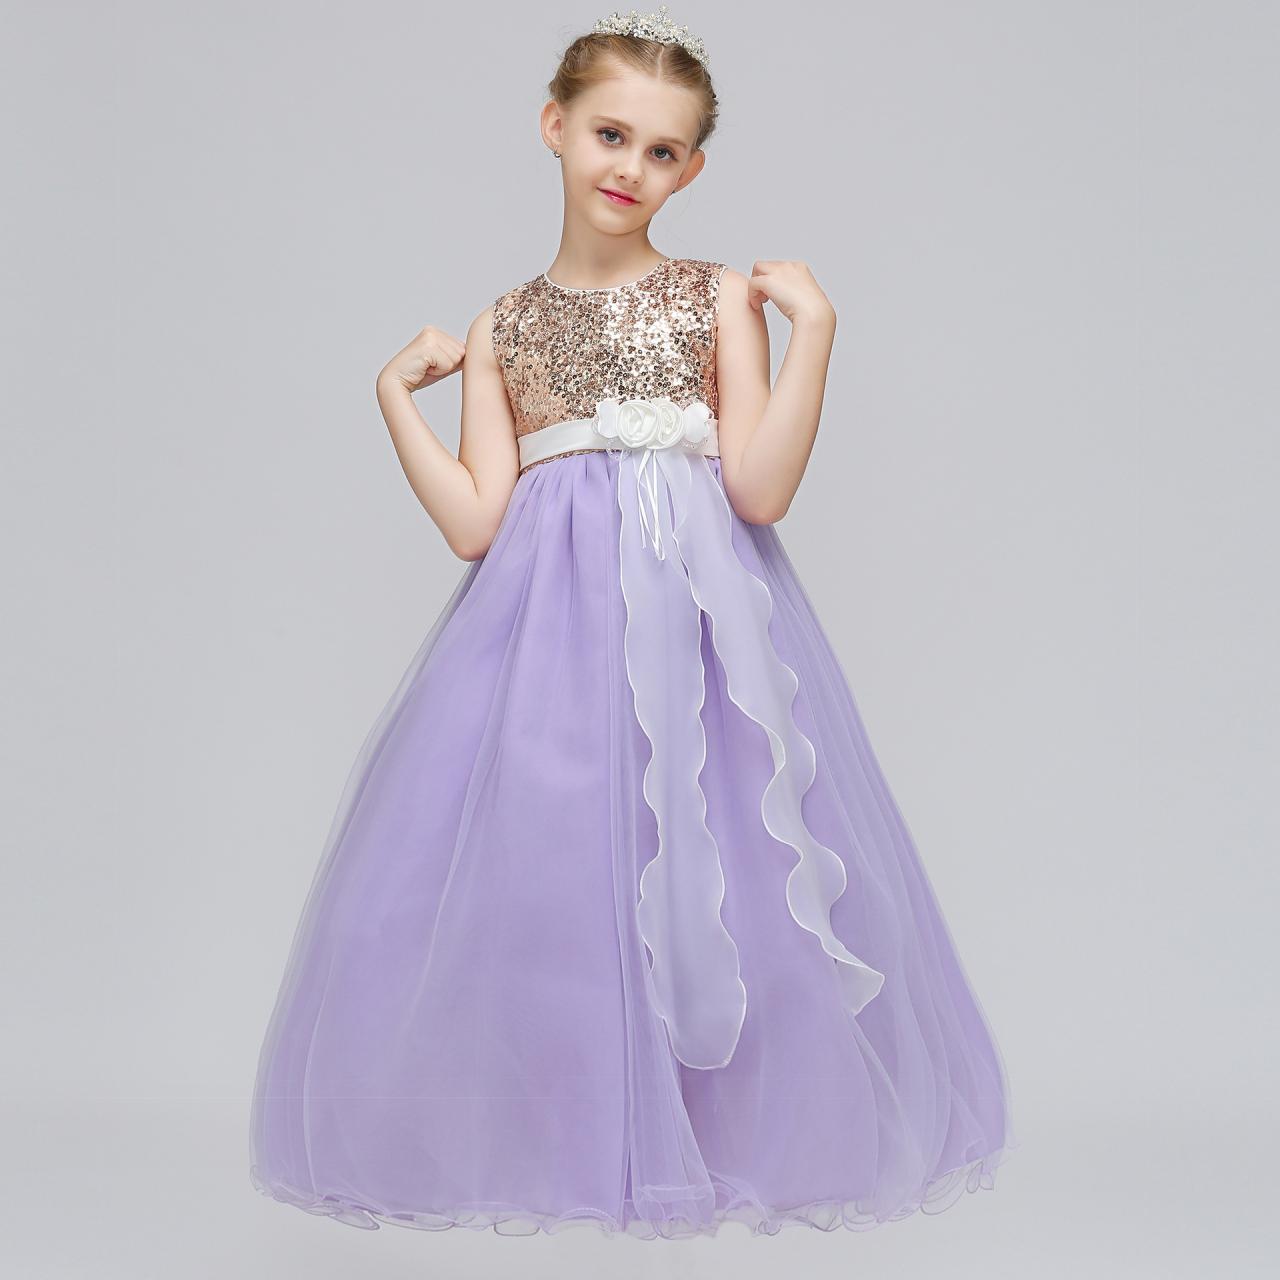 Sequined Long Flower Girl Dress Kids Teens Birthday Party Gowns Children Clothes lilac